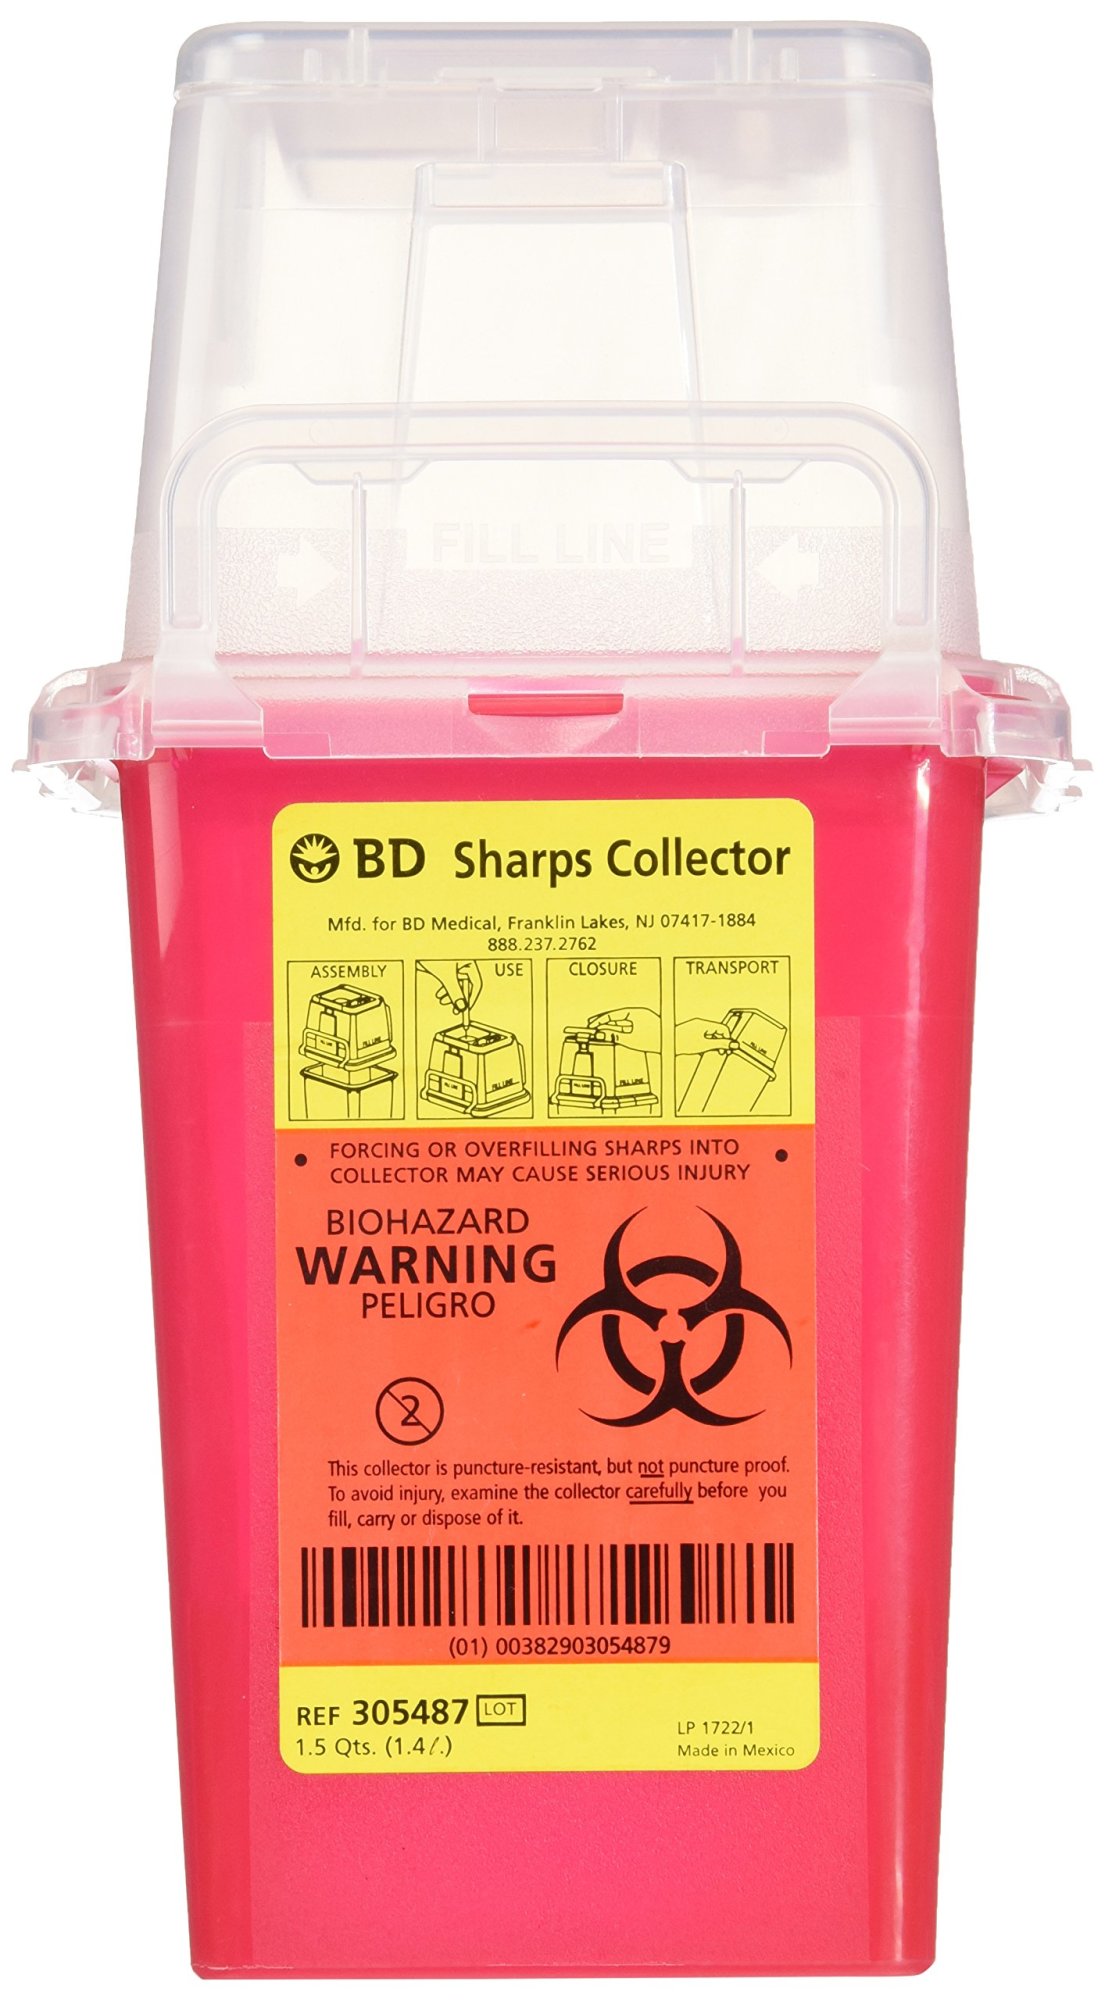 Sharps Collector, 1.5 Qt, Phlebotomy, Red - image 2 of 2